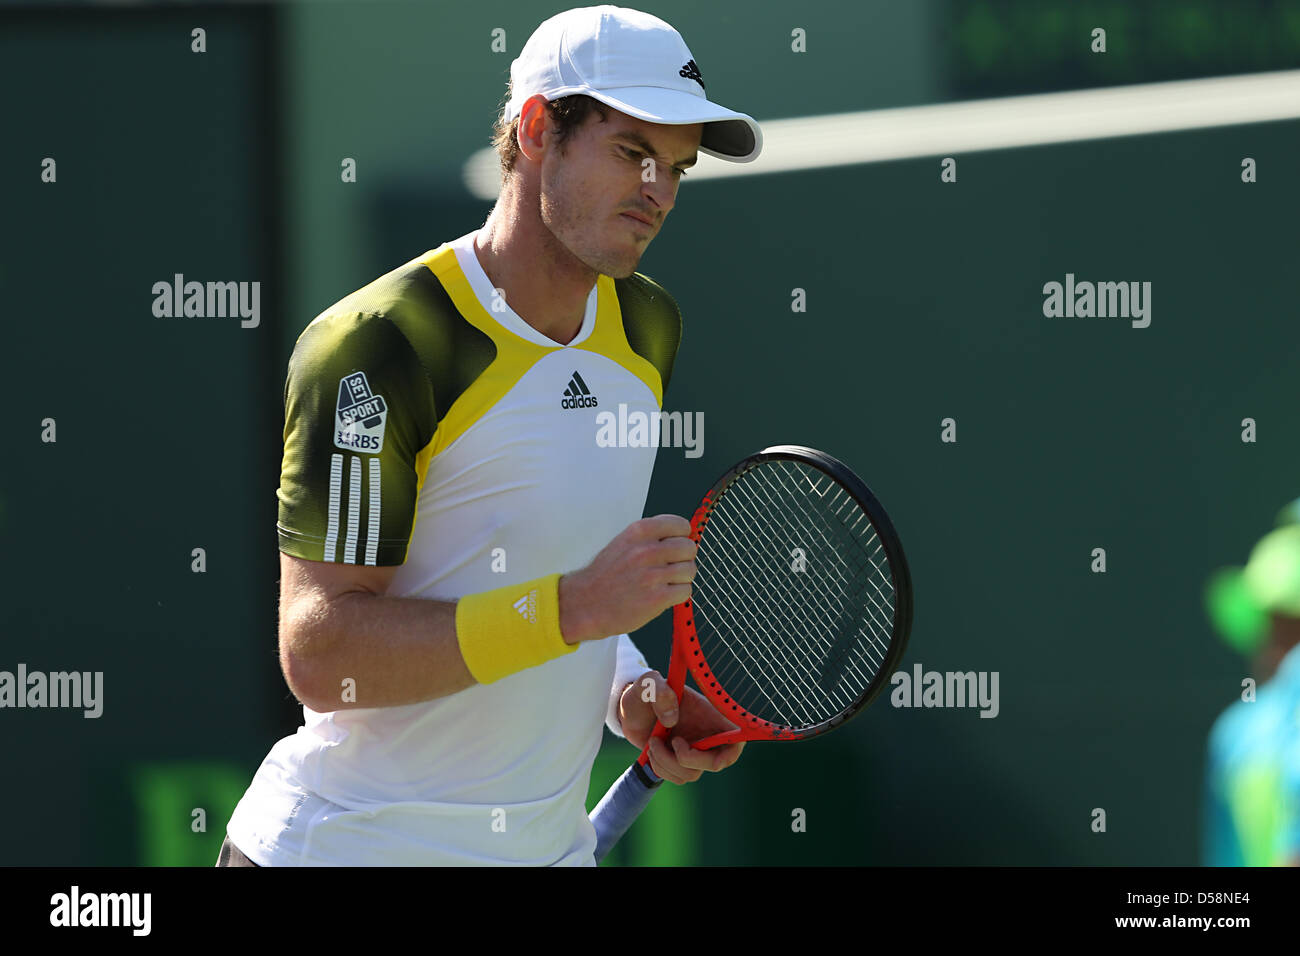 Miami, Florida, USA. 26th March 2013. Andy Murray reacts during day 9 of the Sony Open 2013. Credit: Mauricio Paiz / Alamy Live News Stock Photo